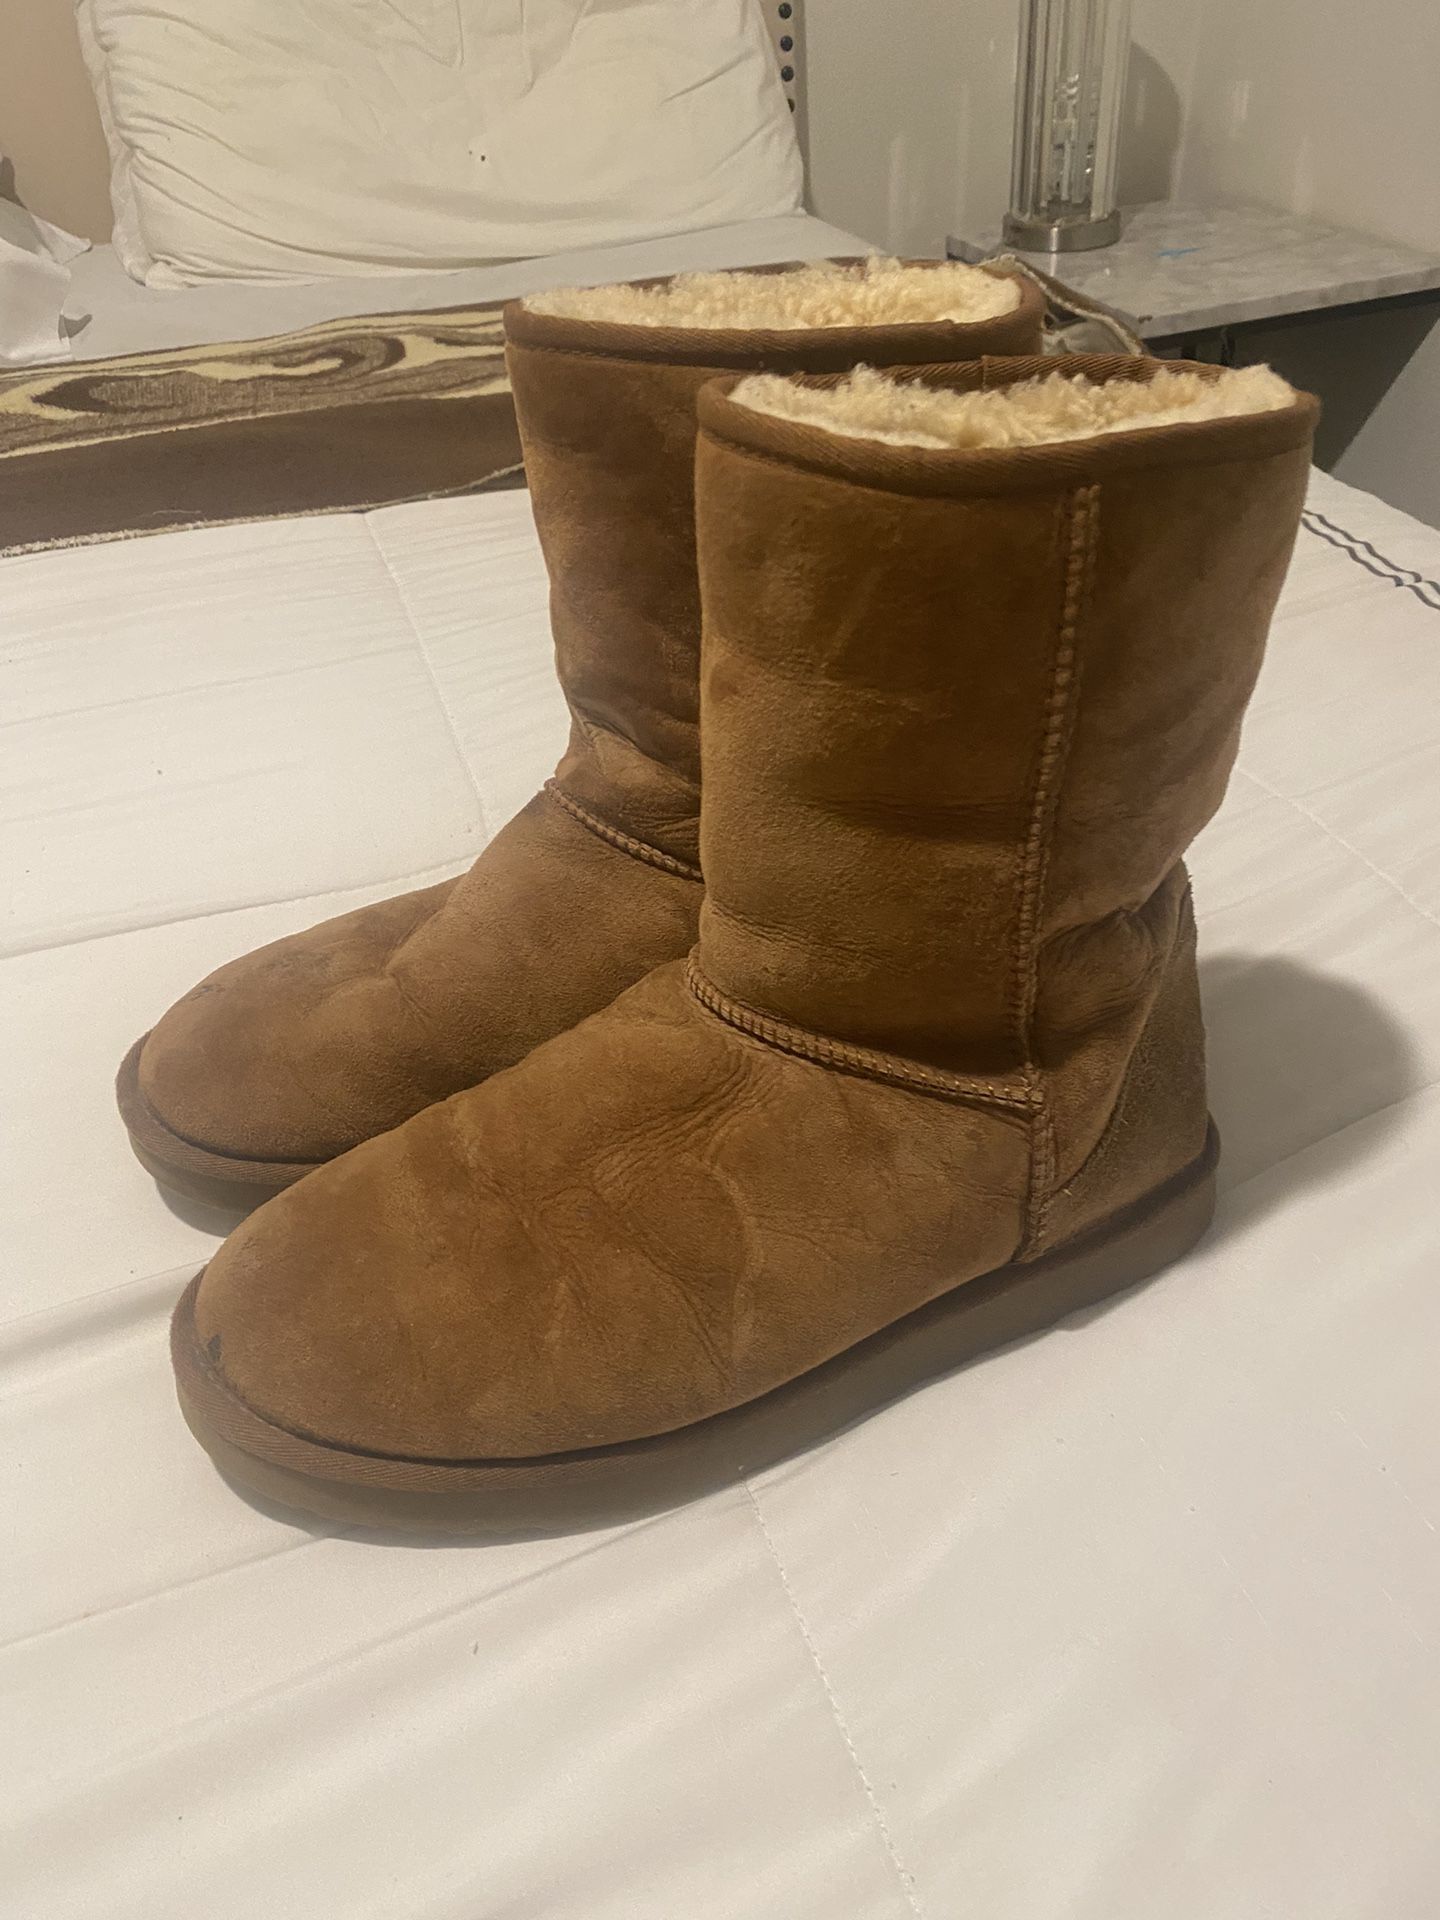 Ugg Boots Classic Size 10